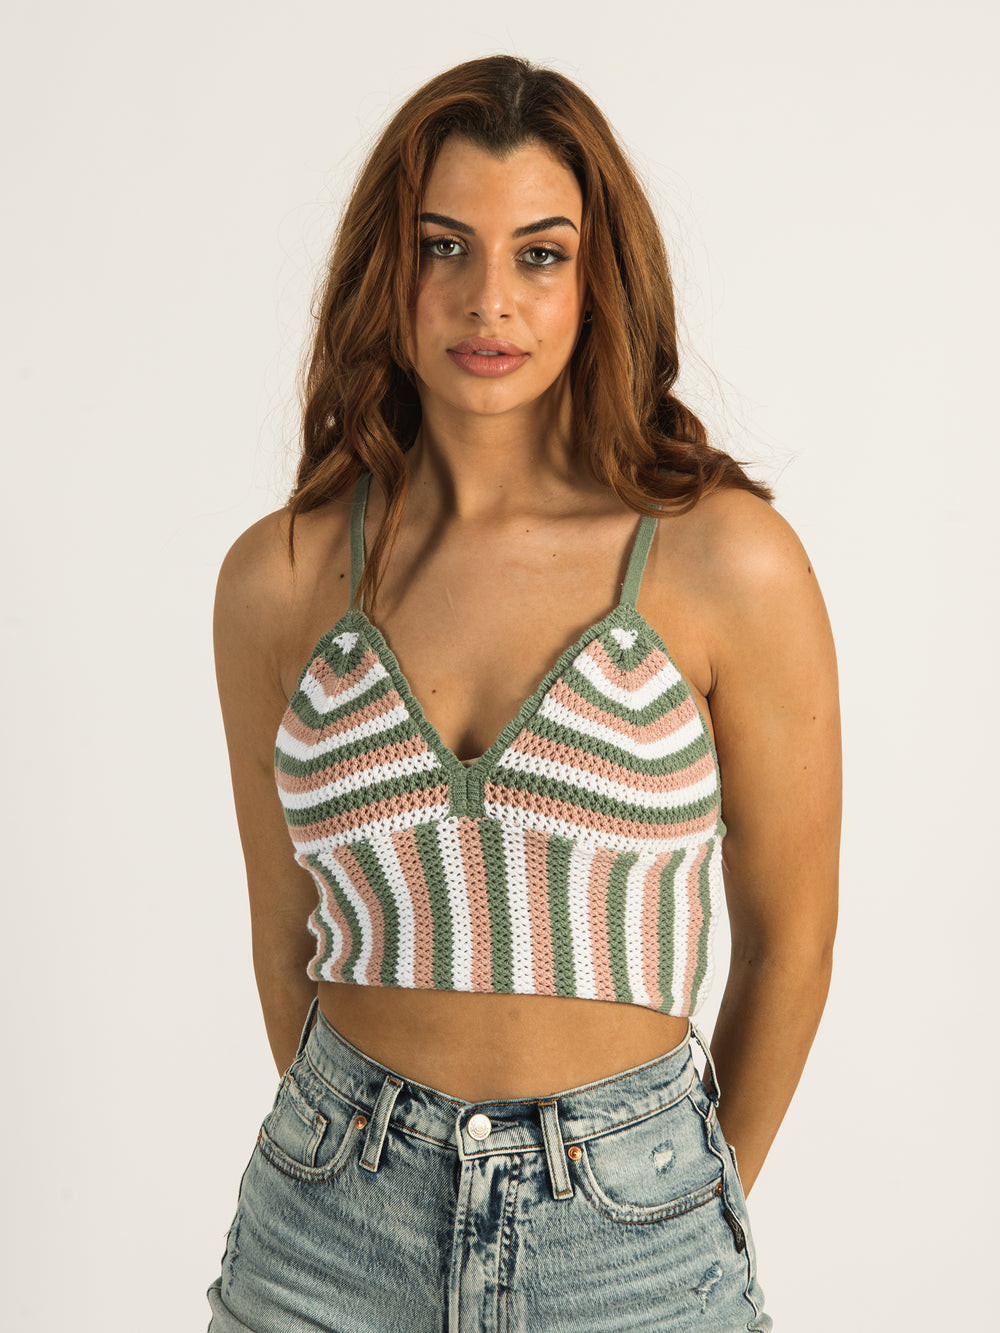 HARLOW ALEXIS CROCHET TANK TOP  - CLEARANCE